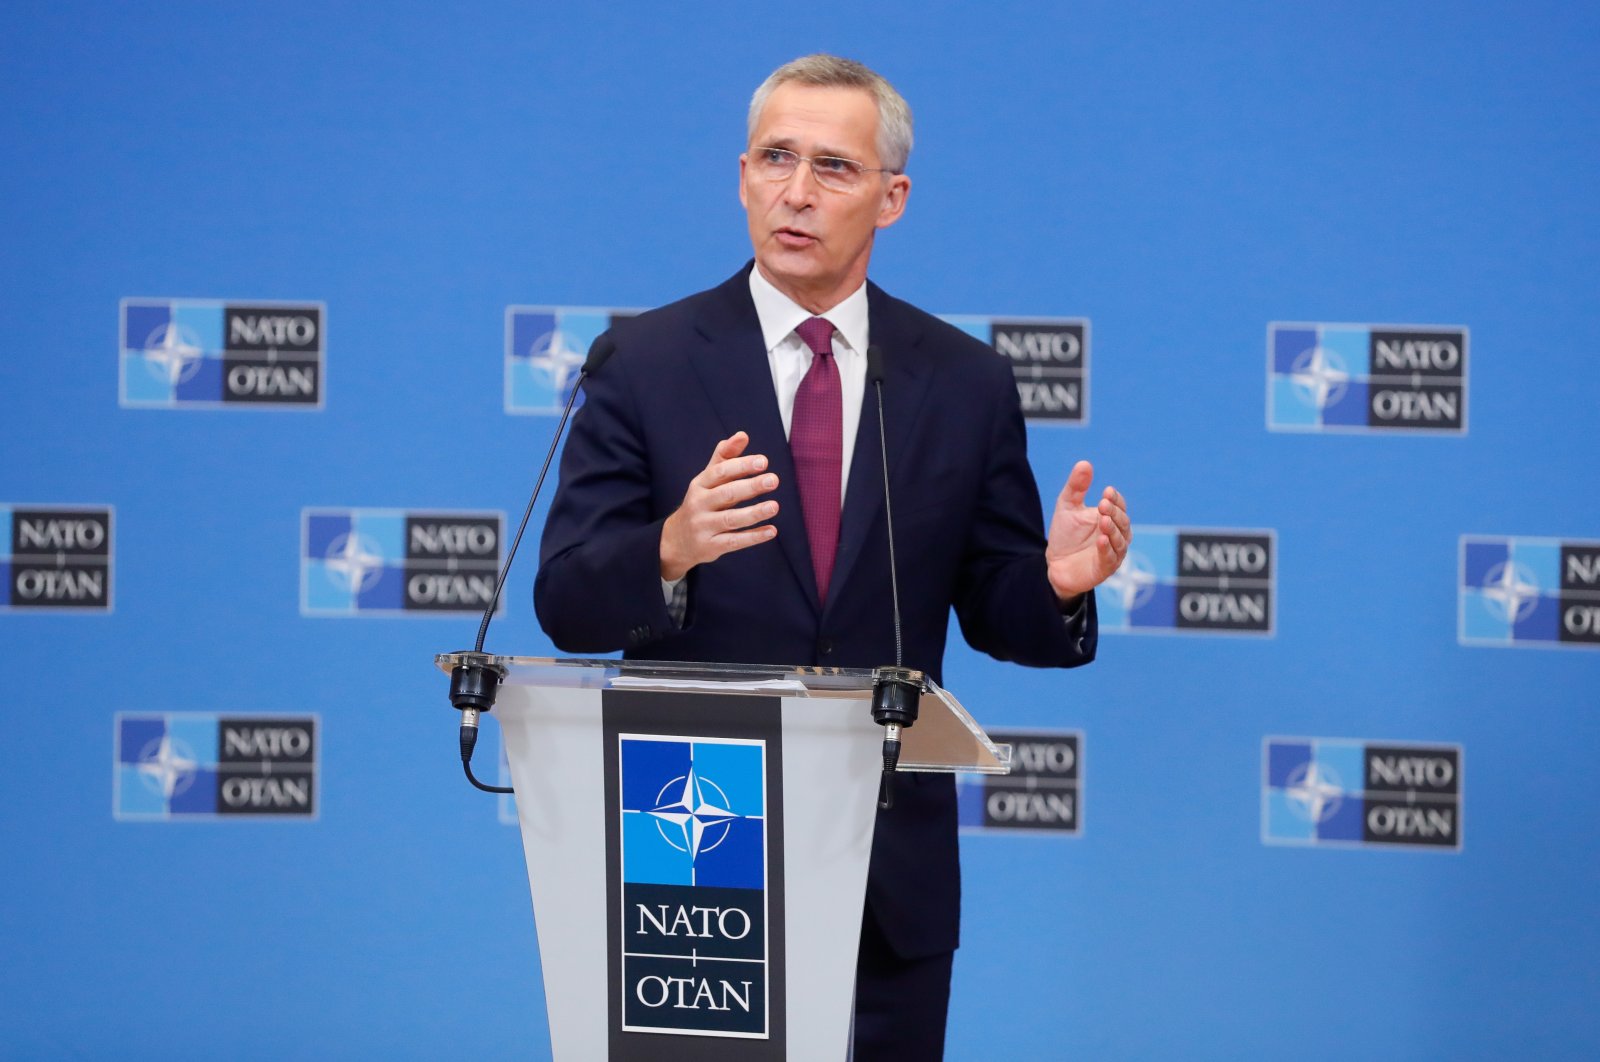 NATO Secretary-General Jens Stoltenberg gives a press conference ahead of a two-day meeting of NATO Ministers of Foreign Affairs in Riga, at the NATO headquarters in Brussels, Belgium, Nov. 26, 2021. (EPA Photo)